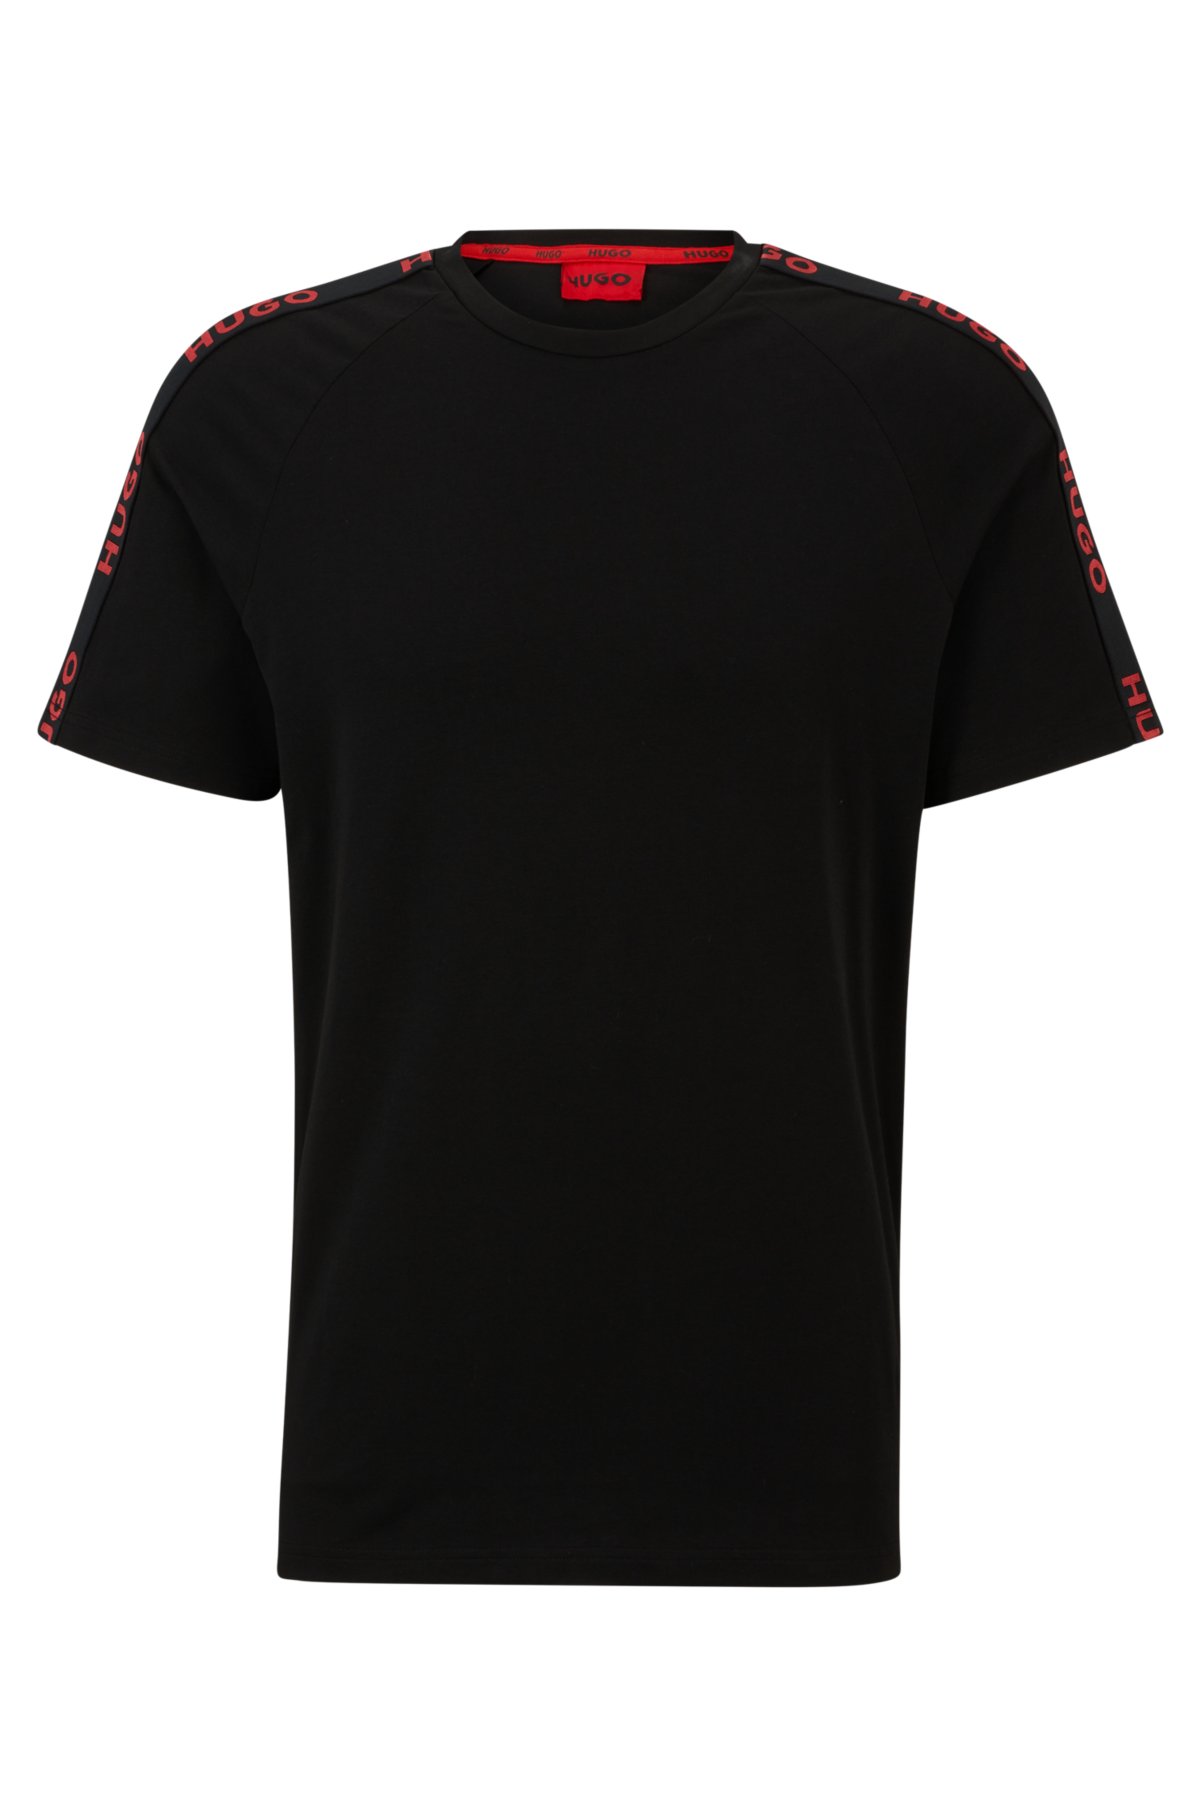 HUGO - Cropped T-shirt in stretch fabric with logo waistband